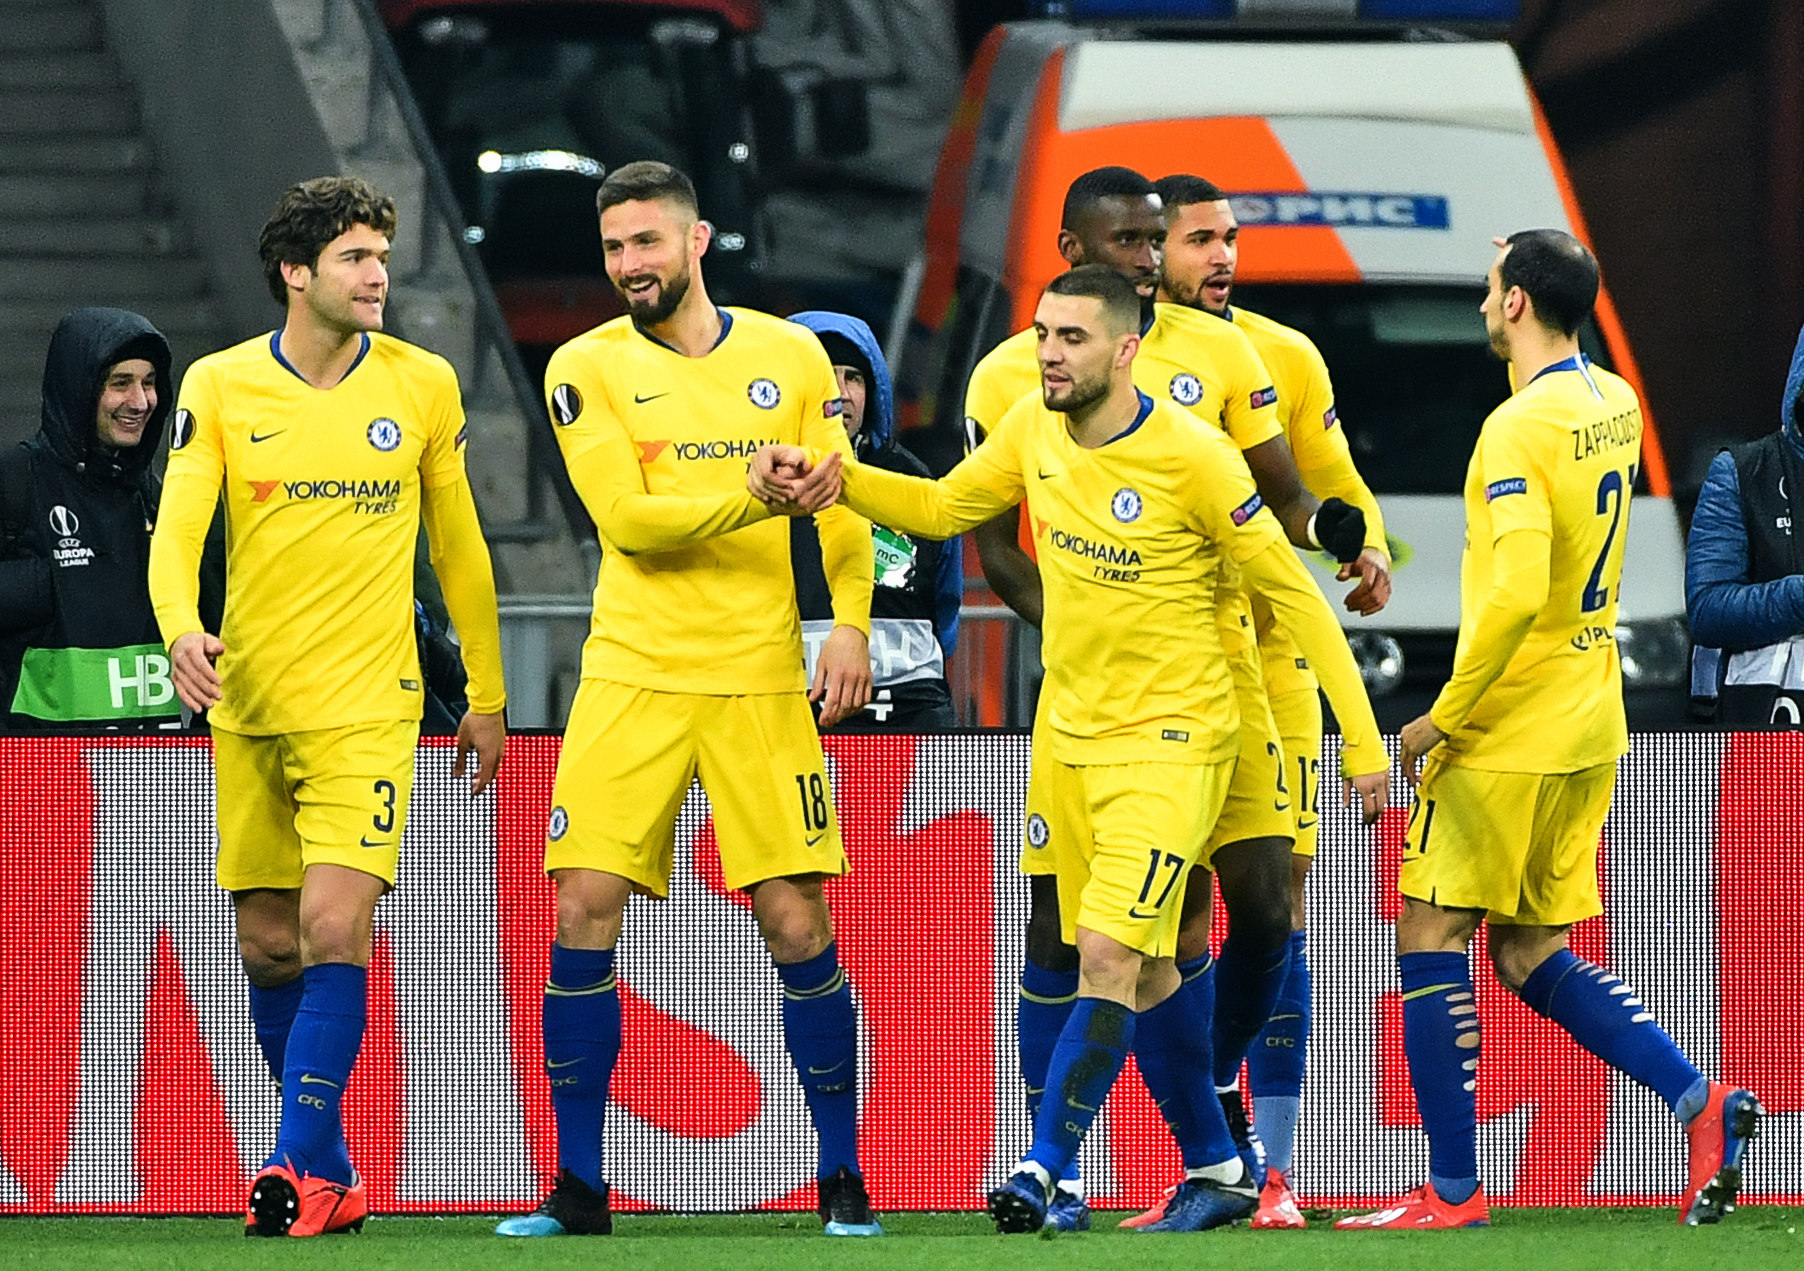 Chelsea's French forward Olivier Giroud (2nd L) celebrates with teammates after scoring a goal during the UEFA Europa League round of 16, second leg football match between FC Dynamo Kyiv and Chelsea FC at NSK Olimpiyskyi stadium in Kiev on March 14, 2019. (Photo by Sergei SUPINSKY / AFP)        (Photo credit should read SERGEI SUPINSKY/AFP/Getty Images)